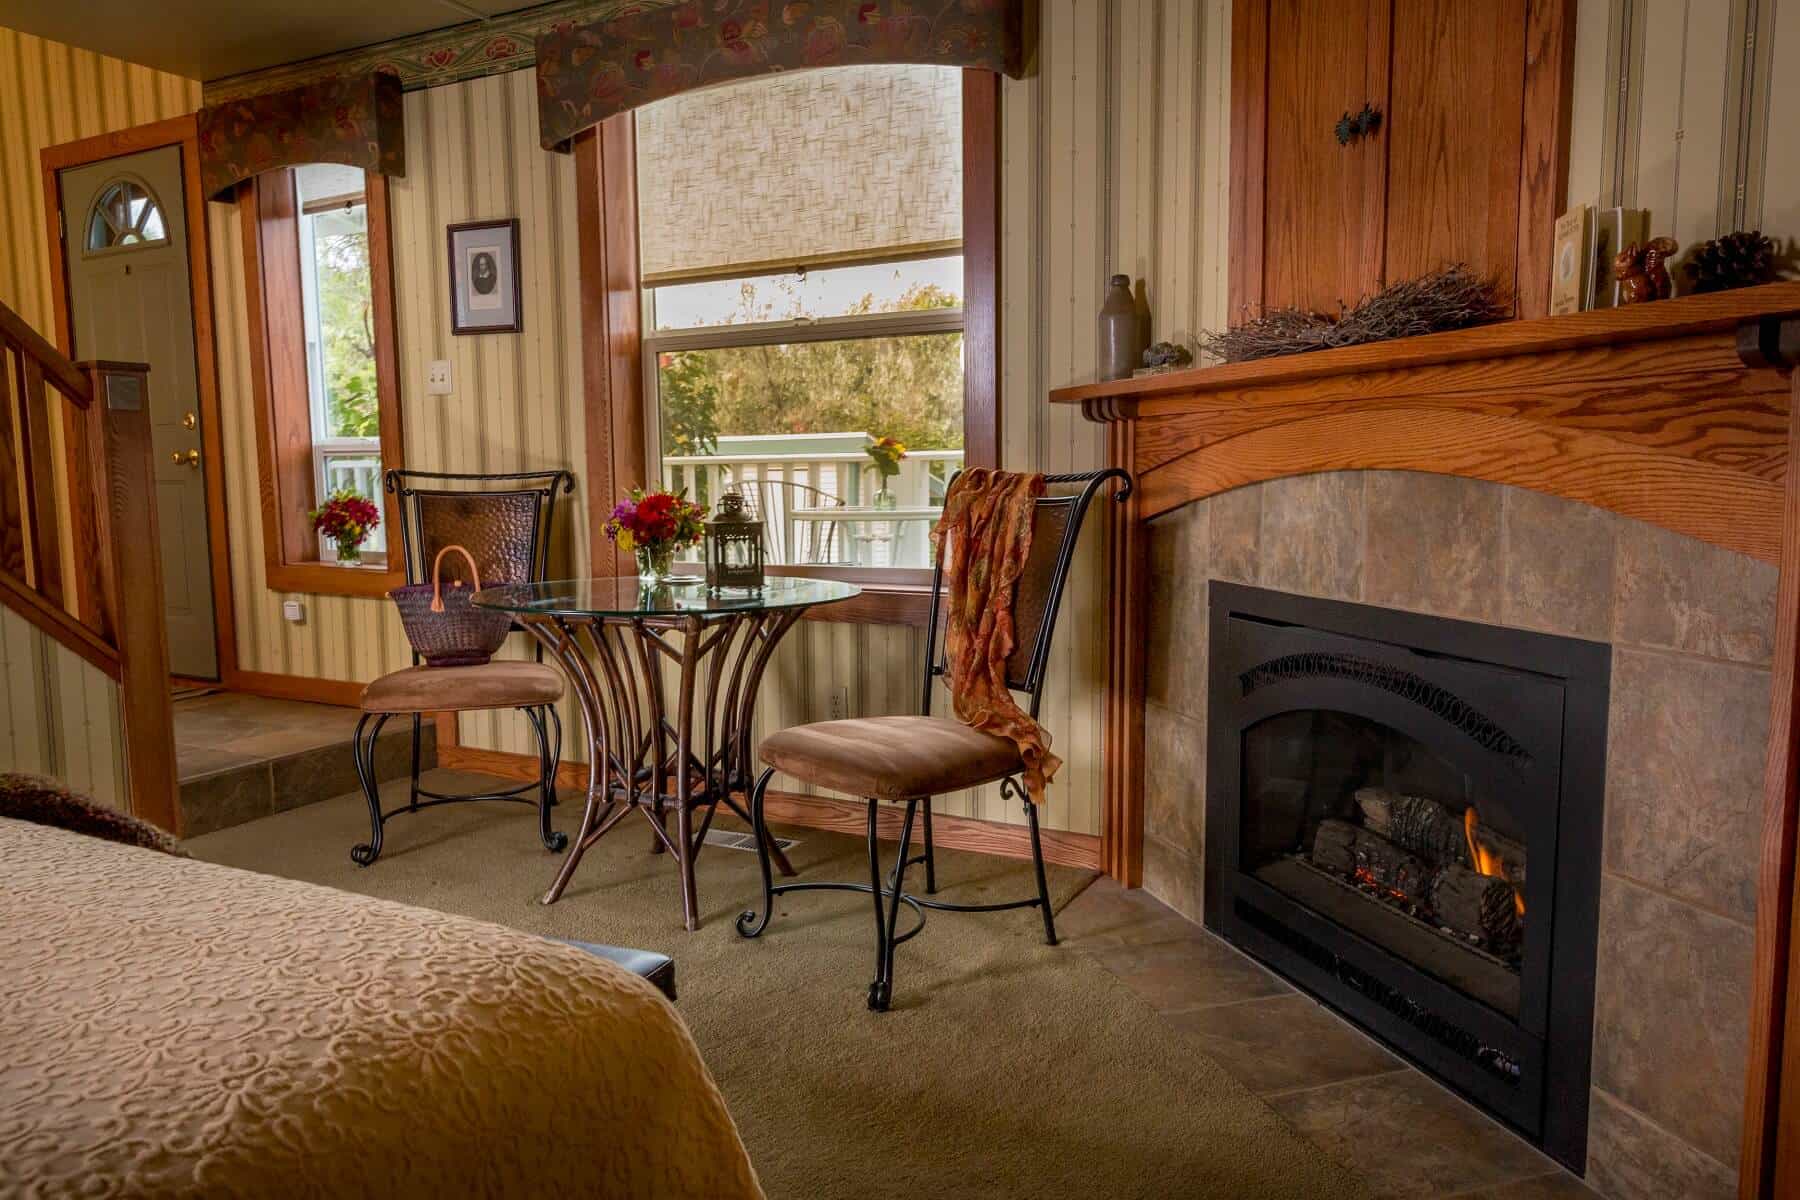 The Hayloft Suite at Country Willows Inn & Estate in Ashland, Oregon has a fireplace in the bedroom and a charming living area on the second floor.